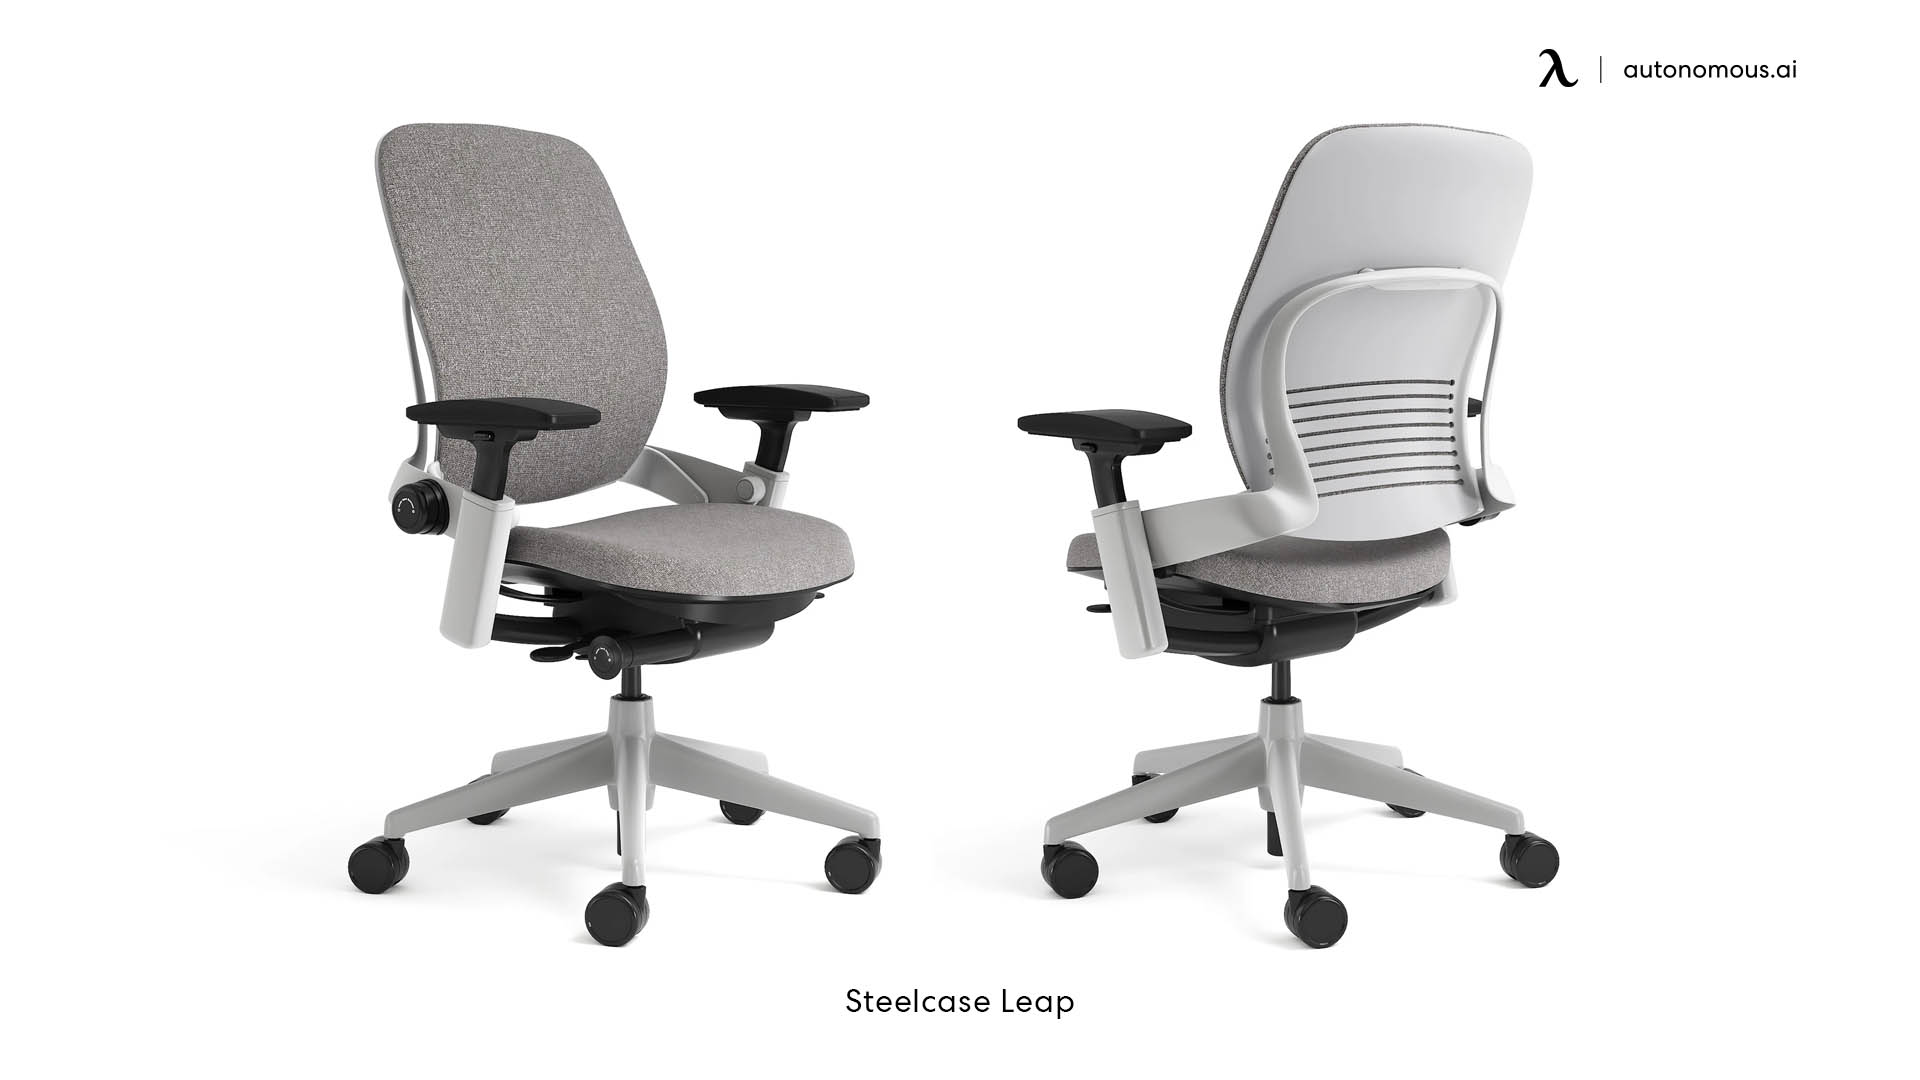 Steelcase Leap home office chair with arms